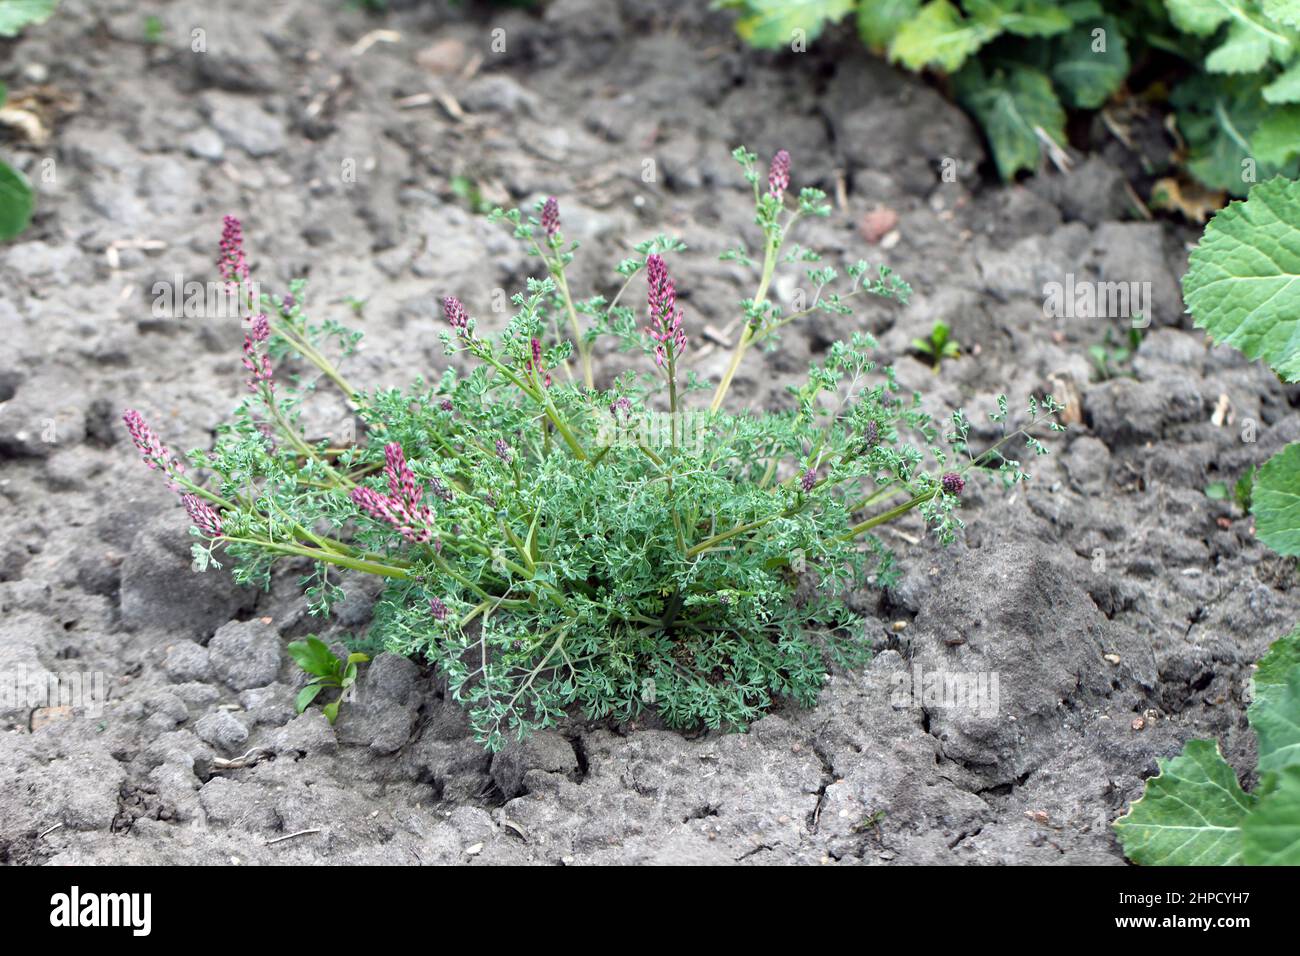 Fumaria officinalis, the common fumitory, drug fumitory or earth smoke, is a herbaceous annual flowering plant in the poppy family Papaveraceae. Stock Photo